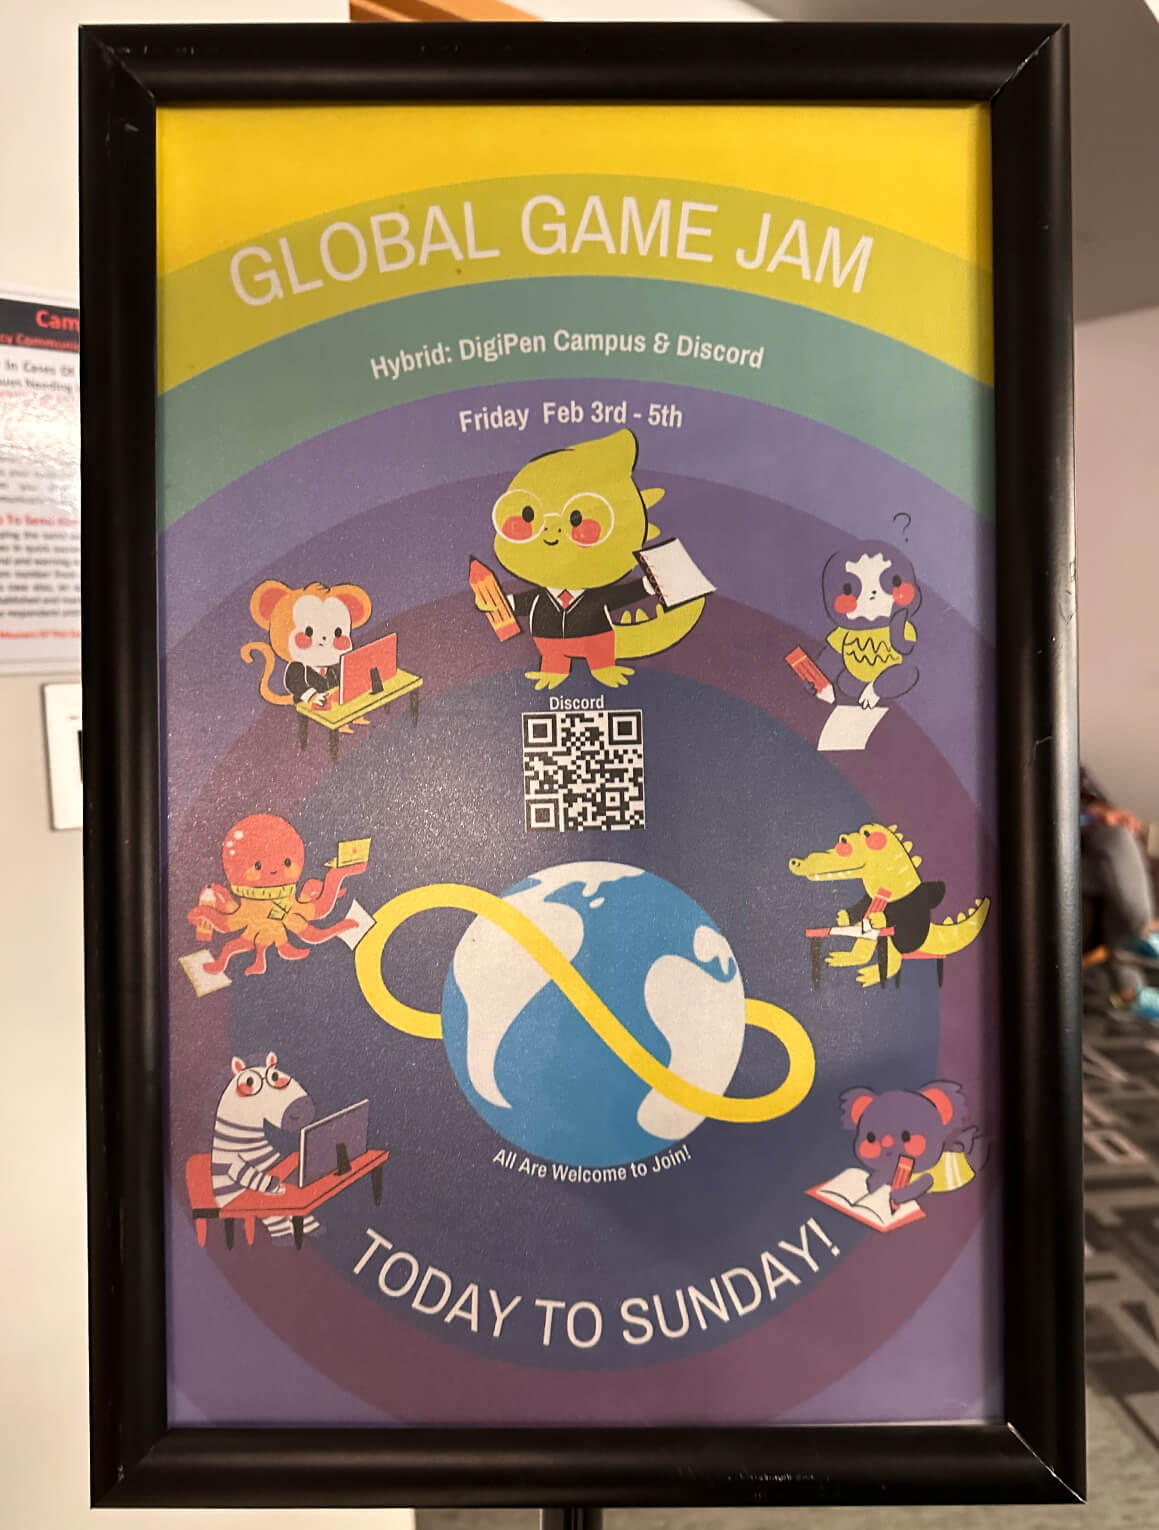 A sign on campus advertising the weekend’s Global Game Jam event.